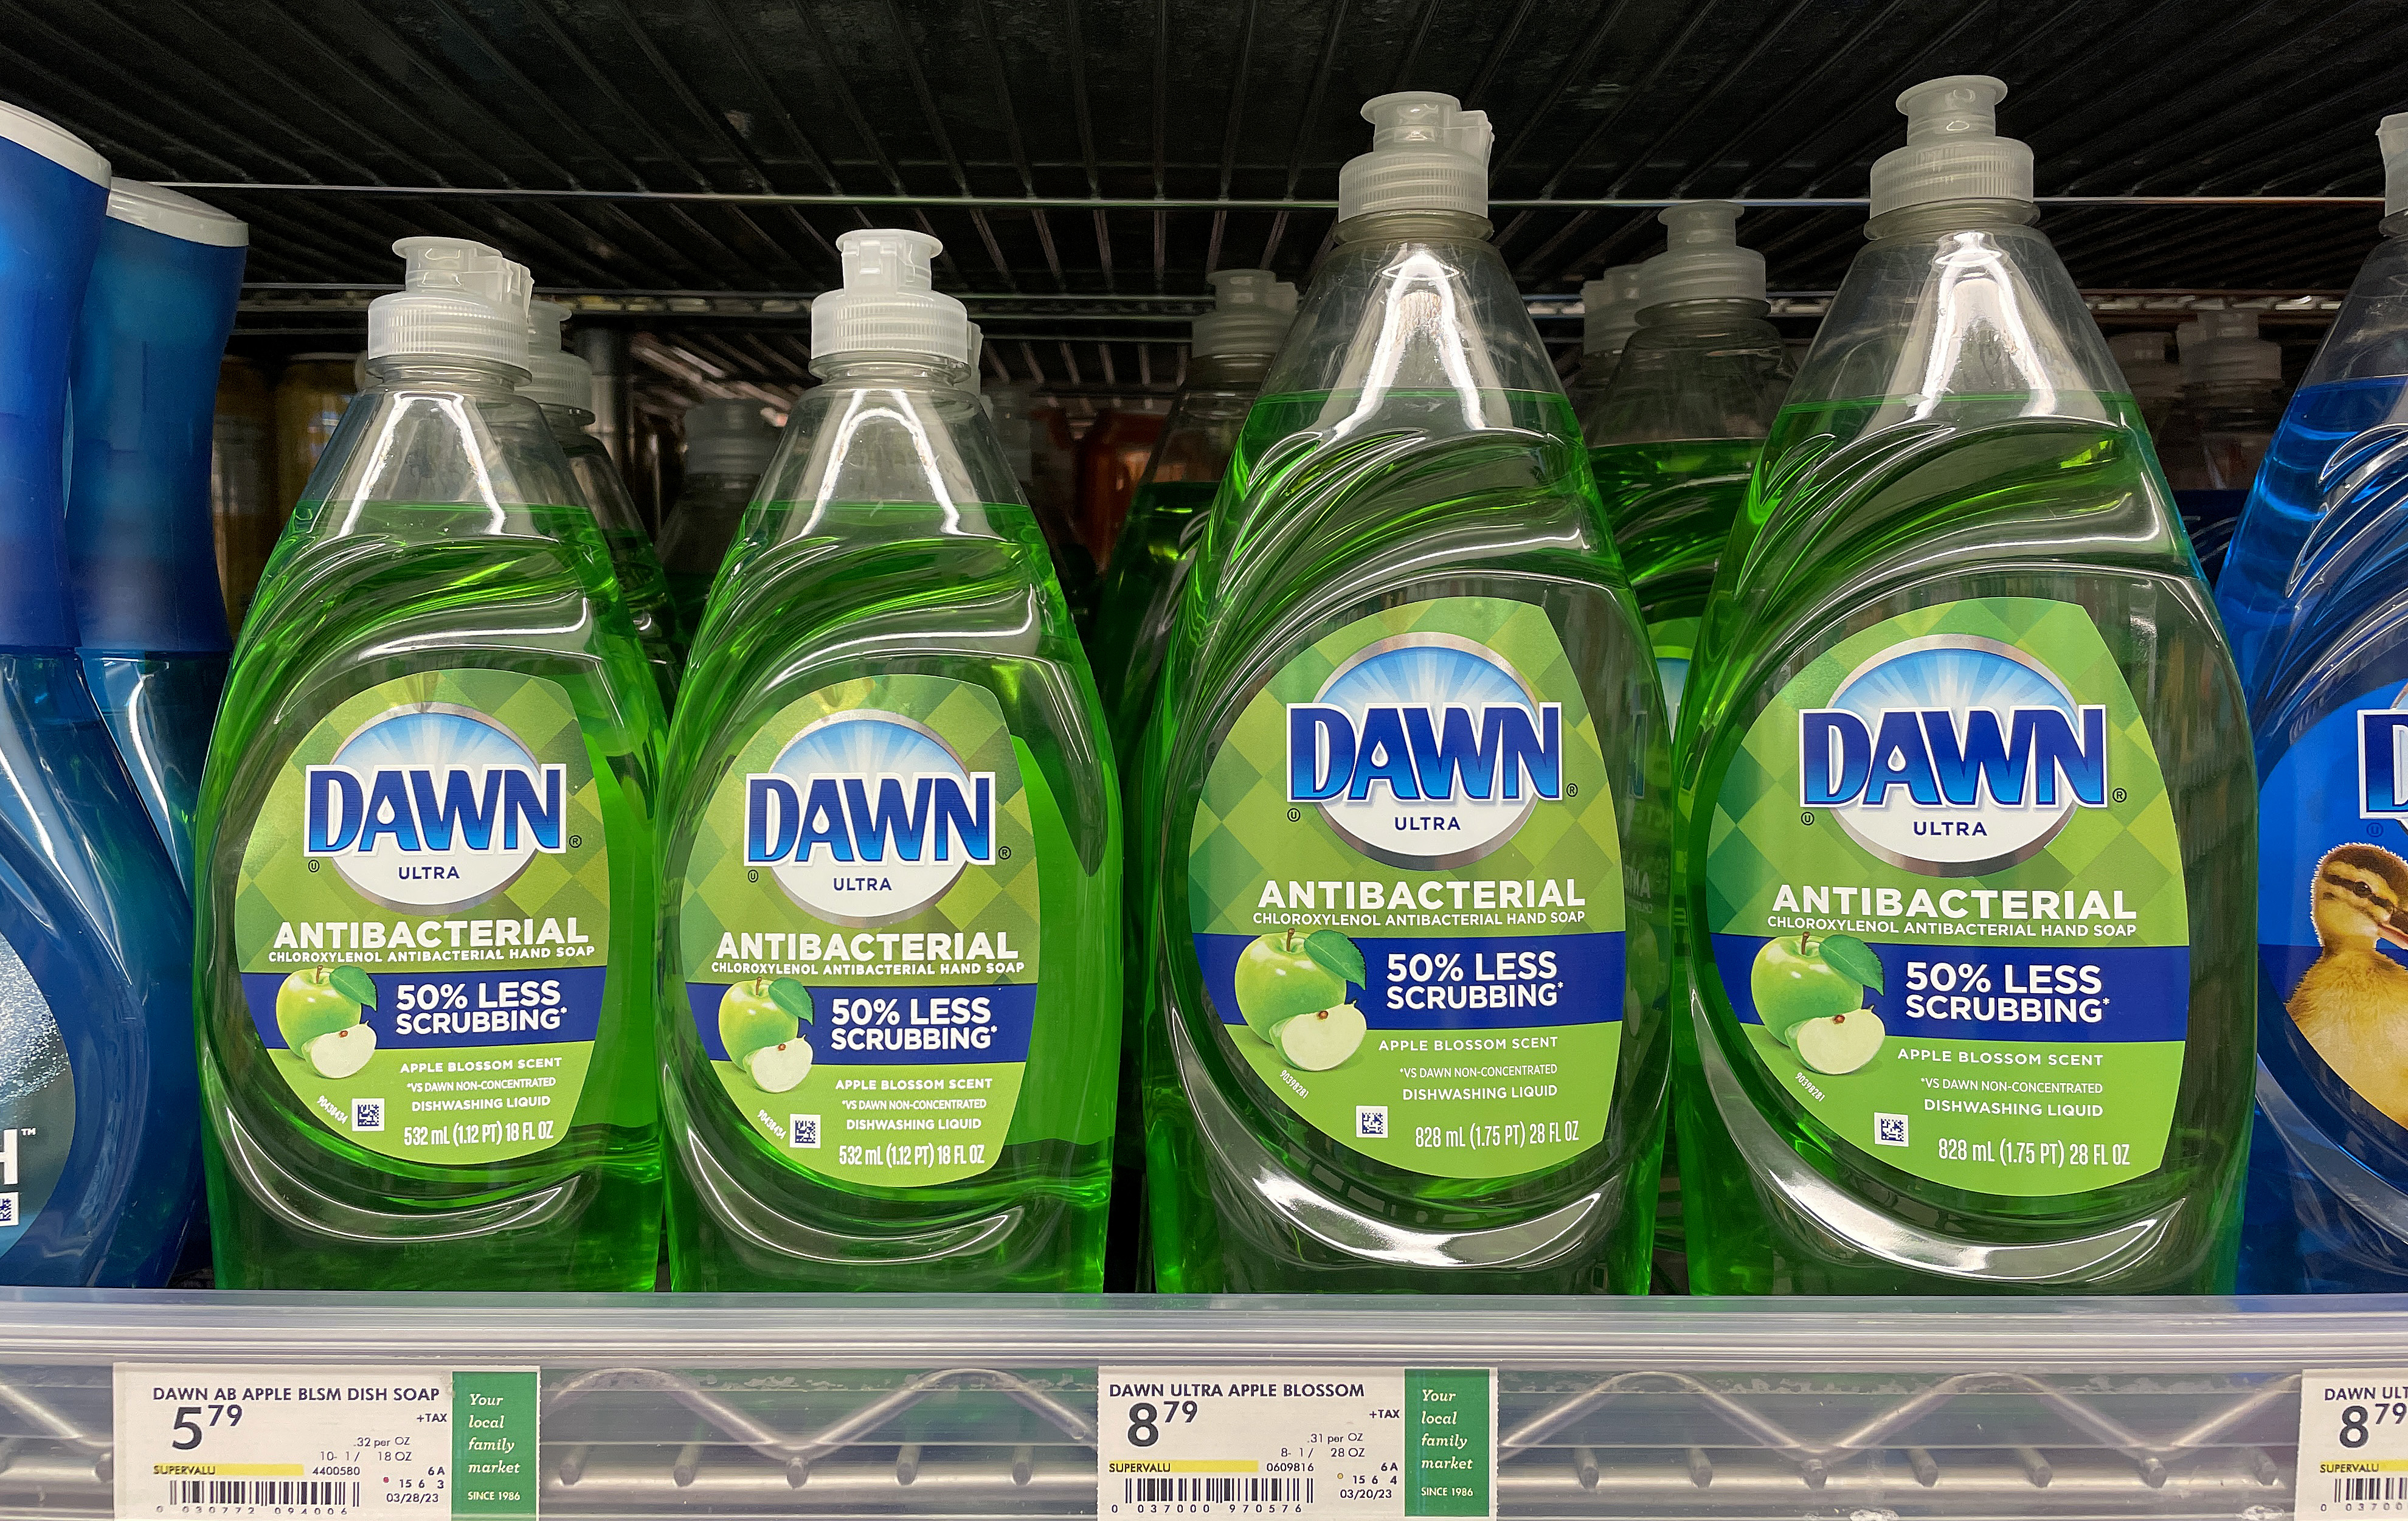 Shelves with bottles of Dawn Ultra Antibacterial dish soap, priced at $5 and $8.79